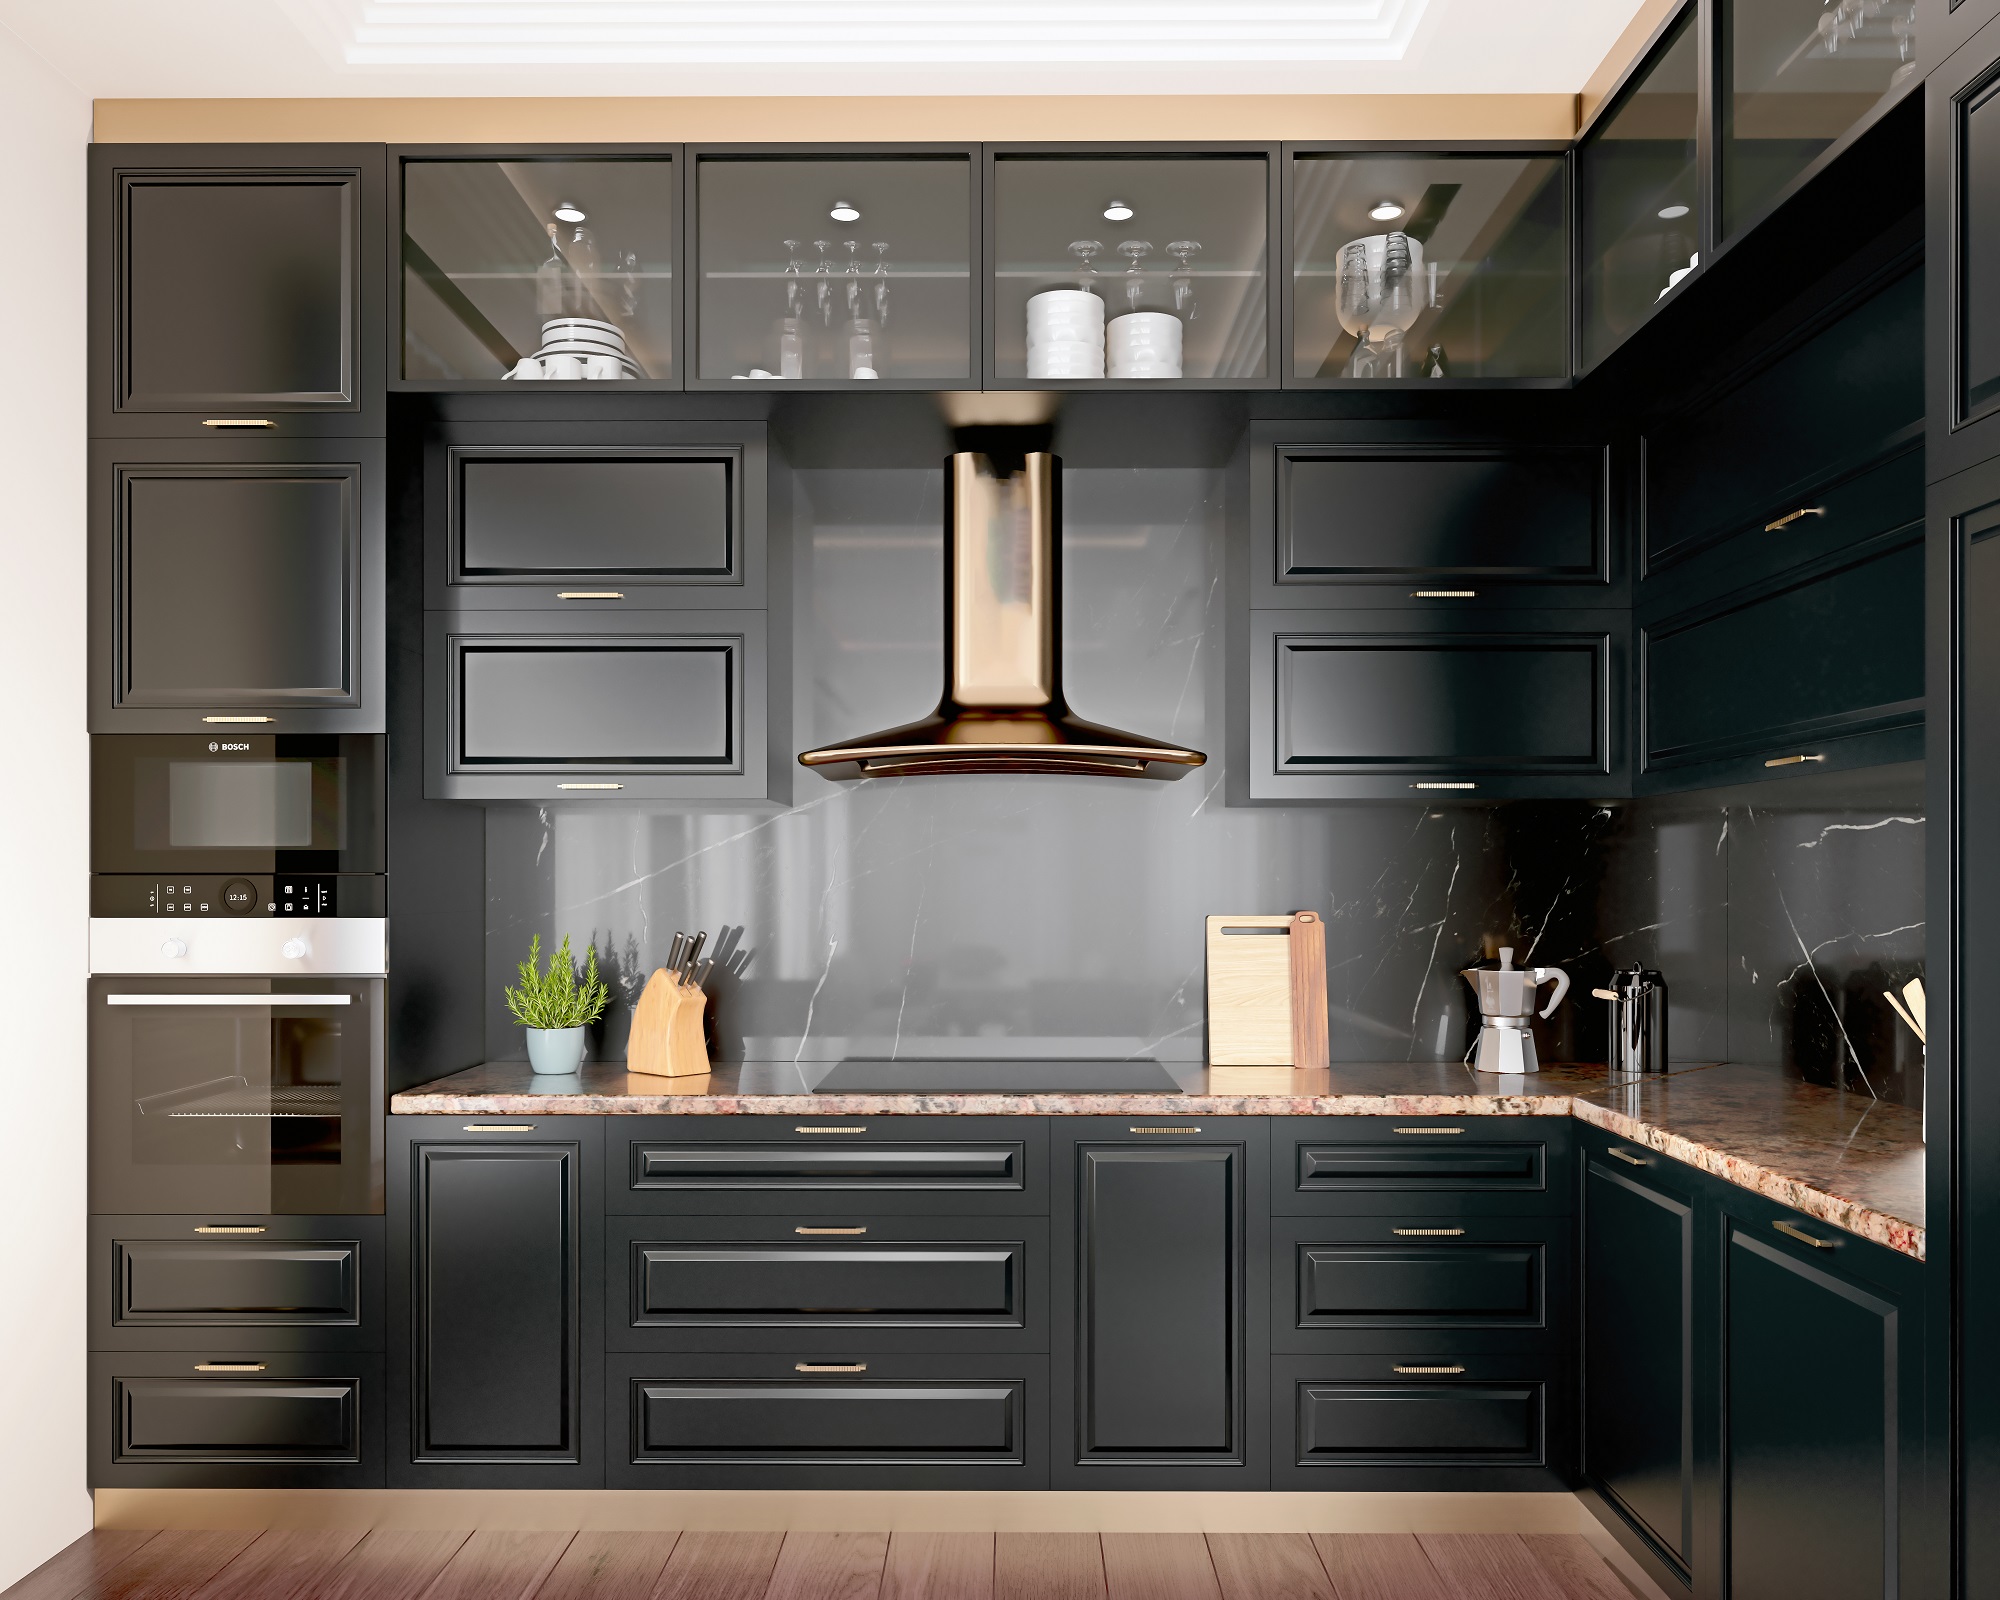 Godrej Kitchen-Best to give Your Kitchen a Modern look - wowkitchens.in